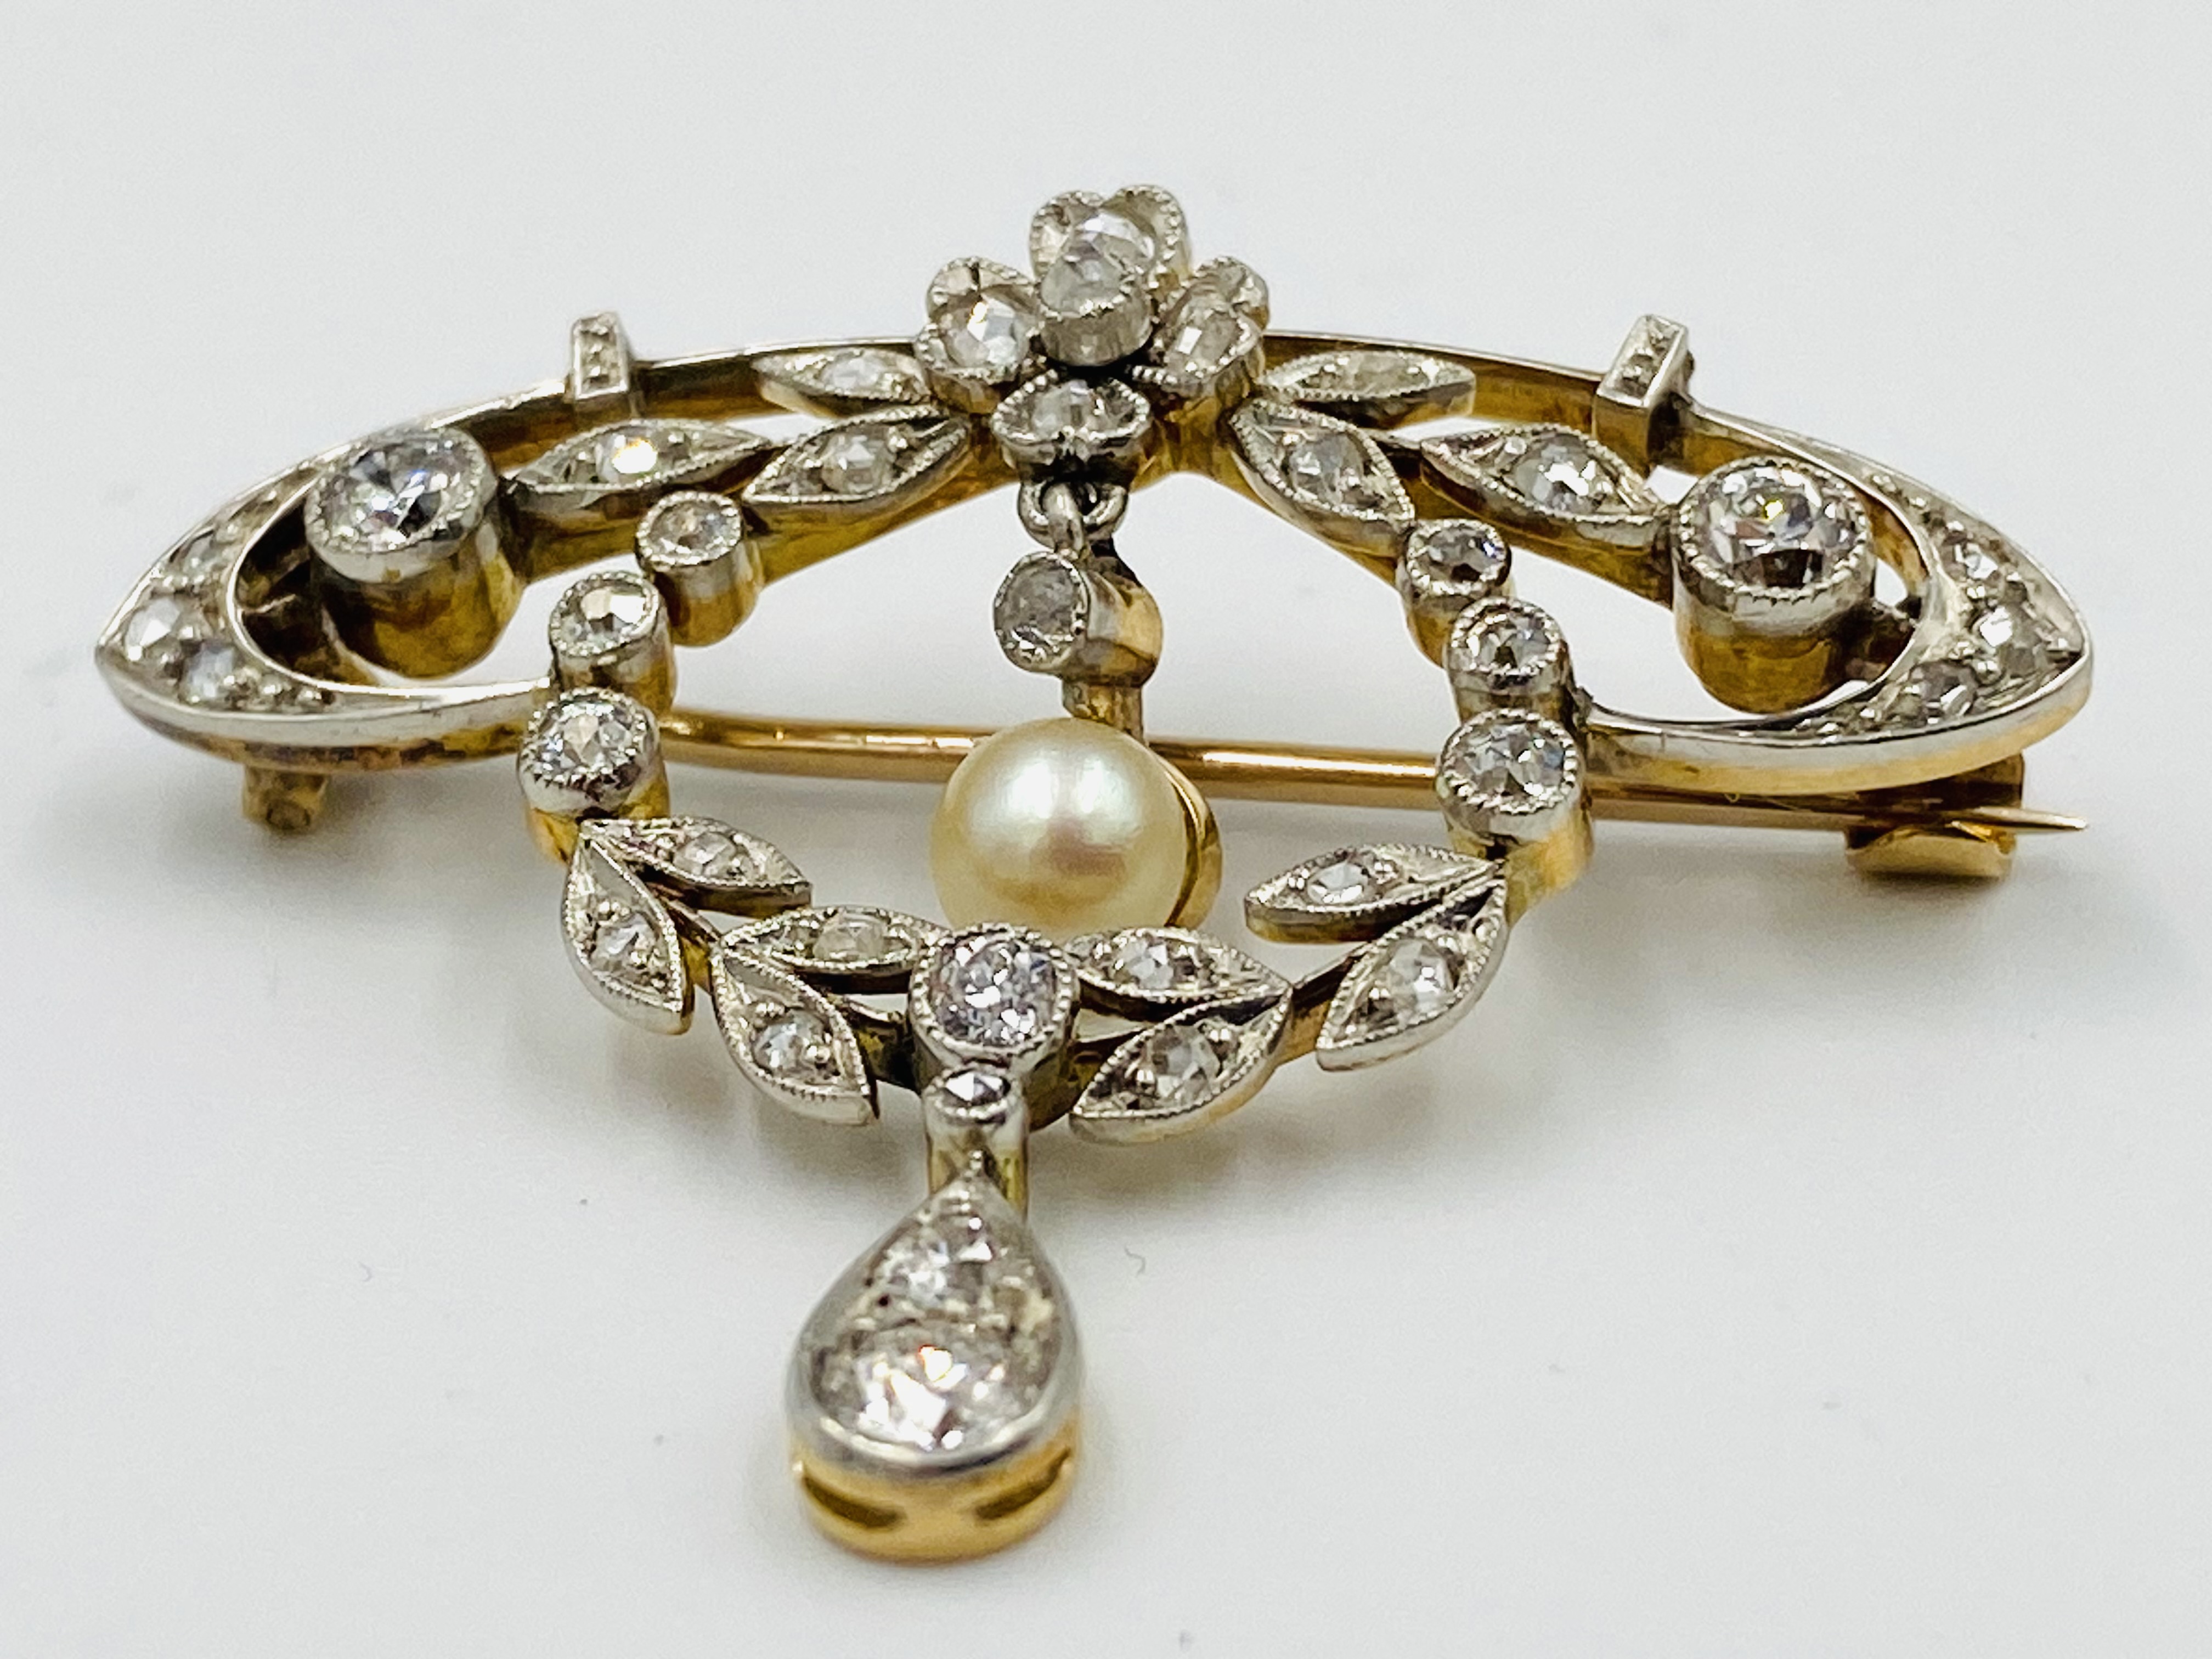 Early 20th century diamond brooch with pearl drop - Image 3 of 4